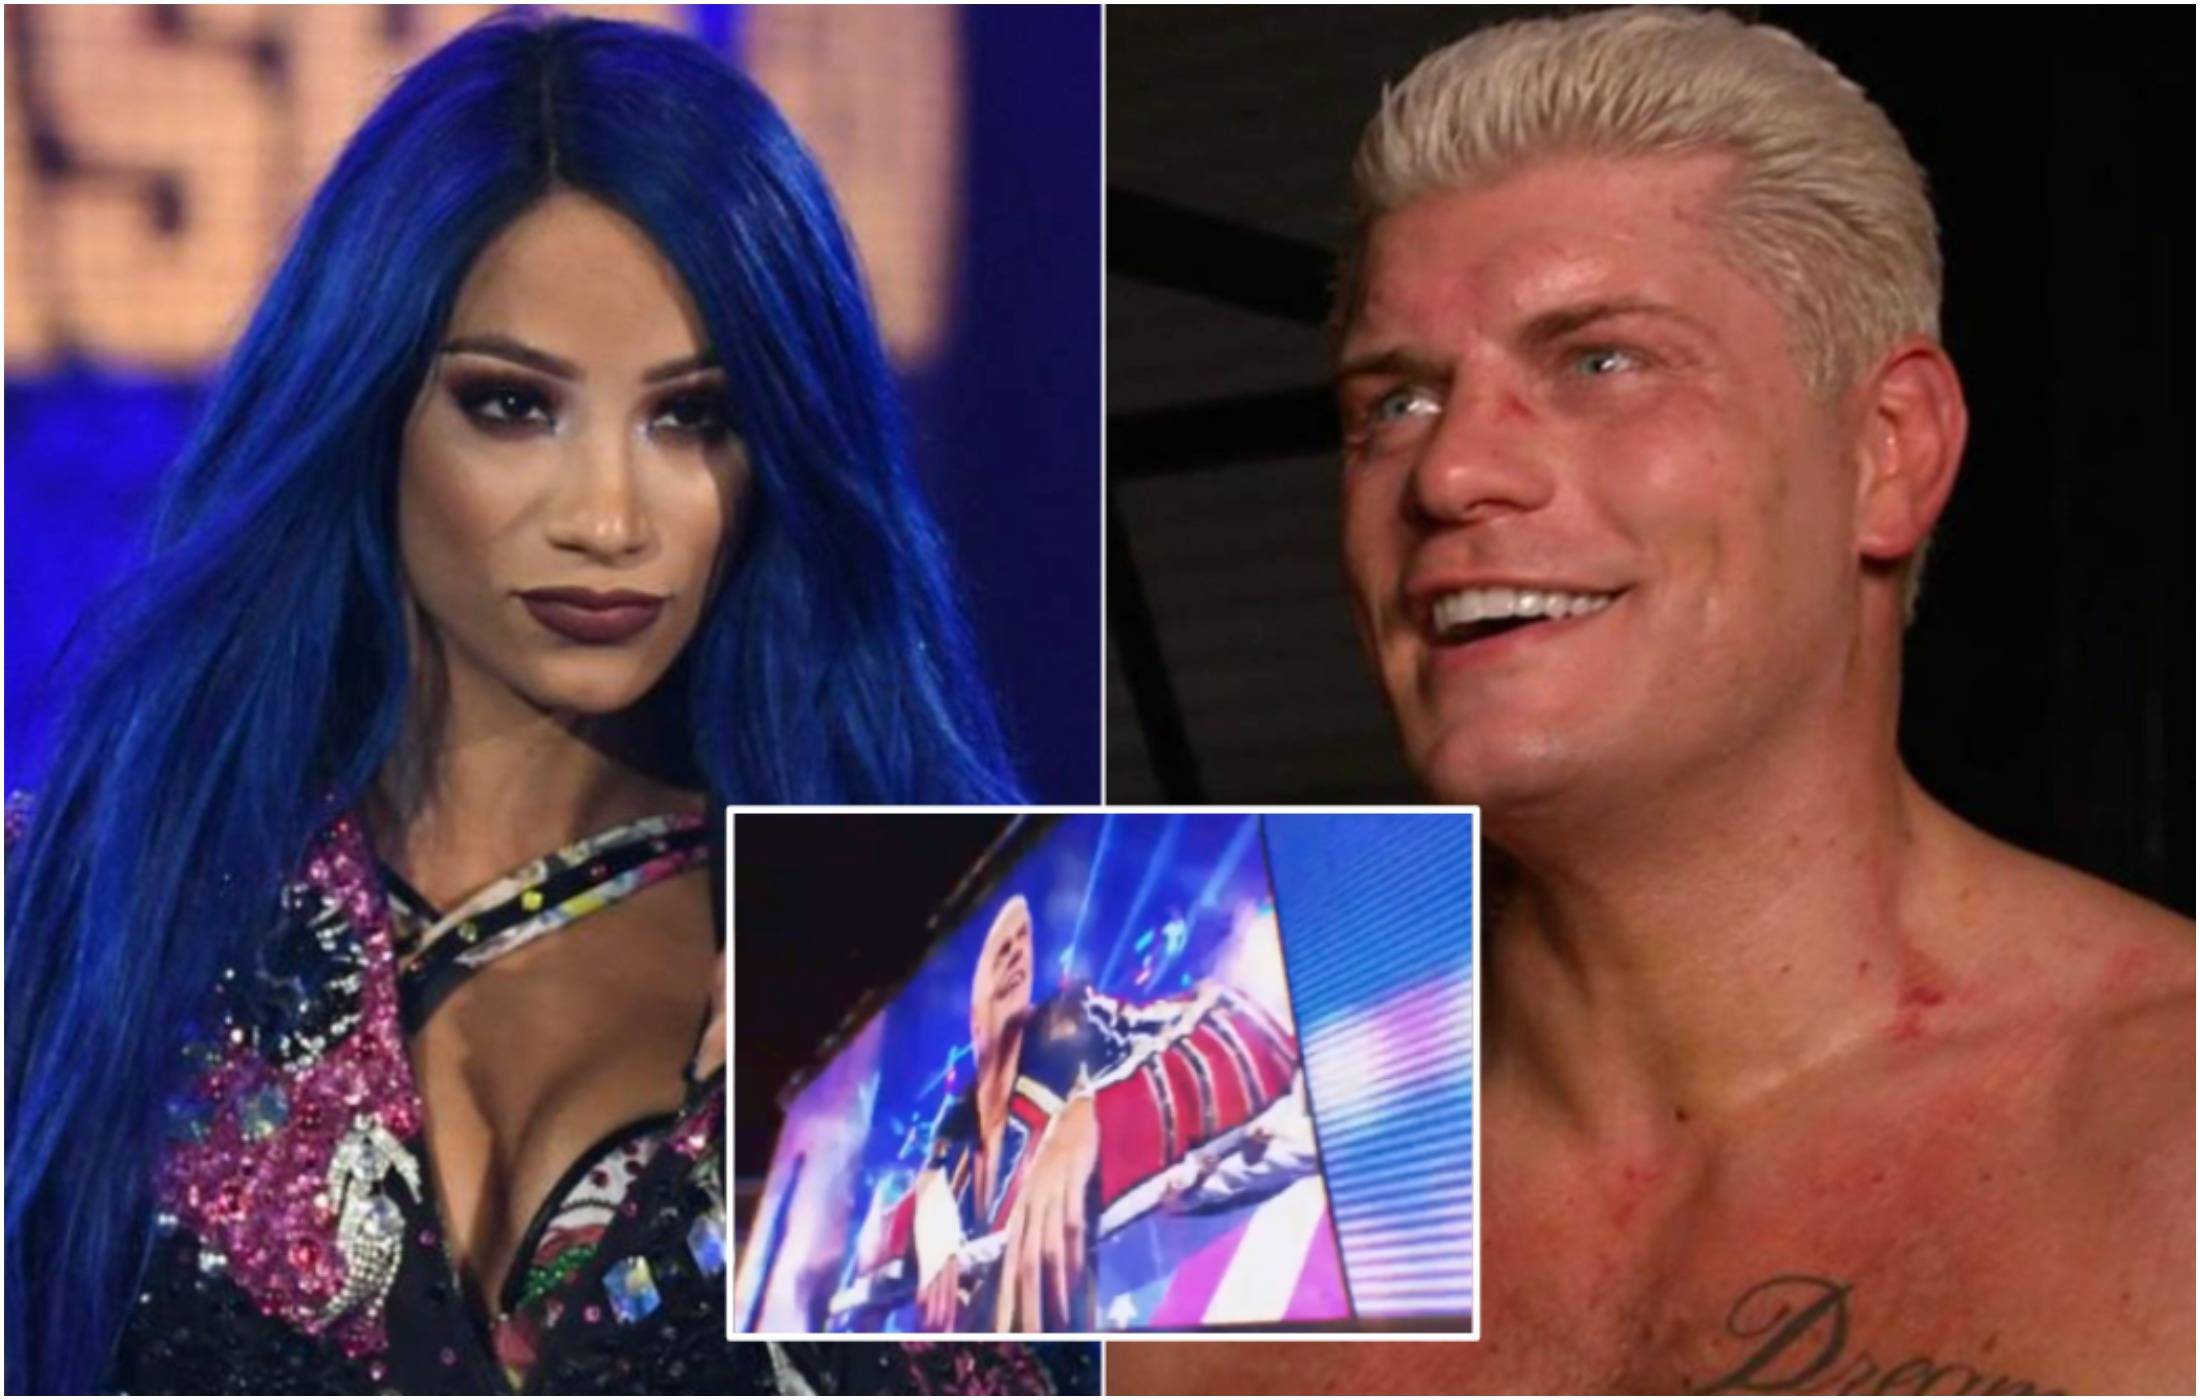 Sasha Banks has been replaced by Cody Rhodes in WWE's video